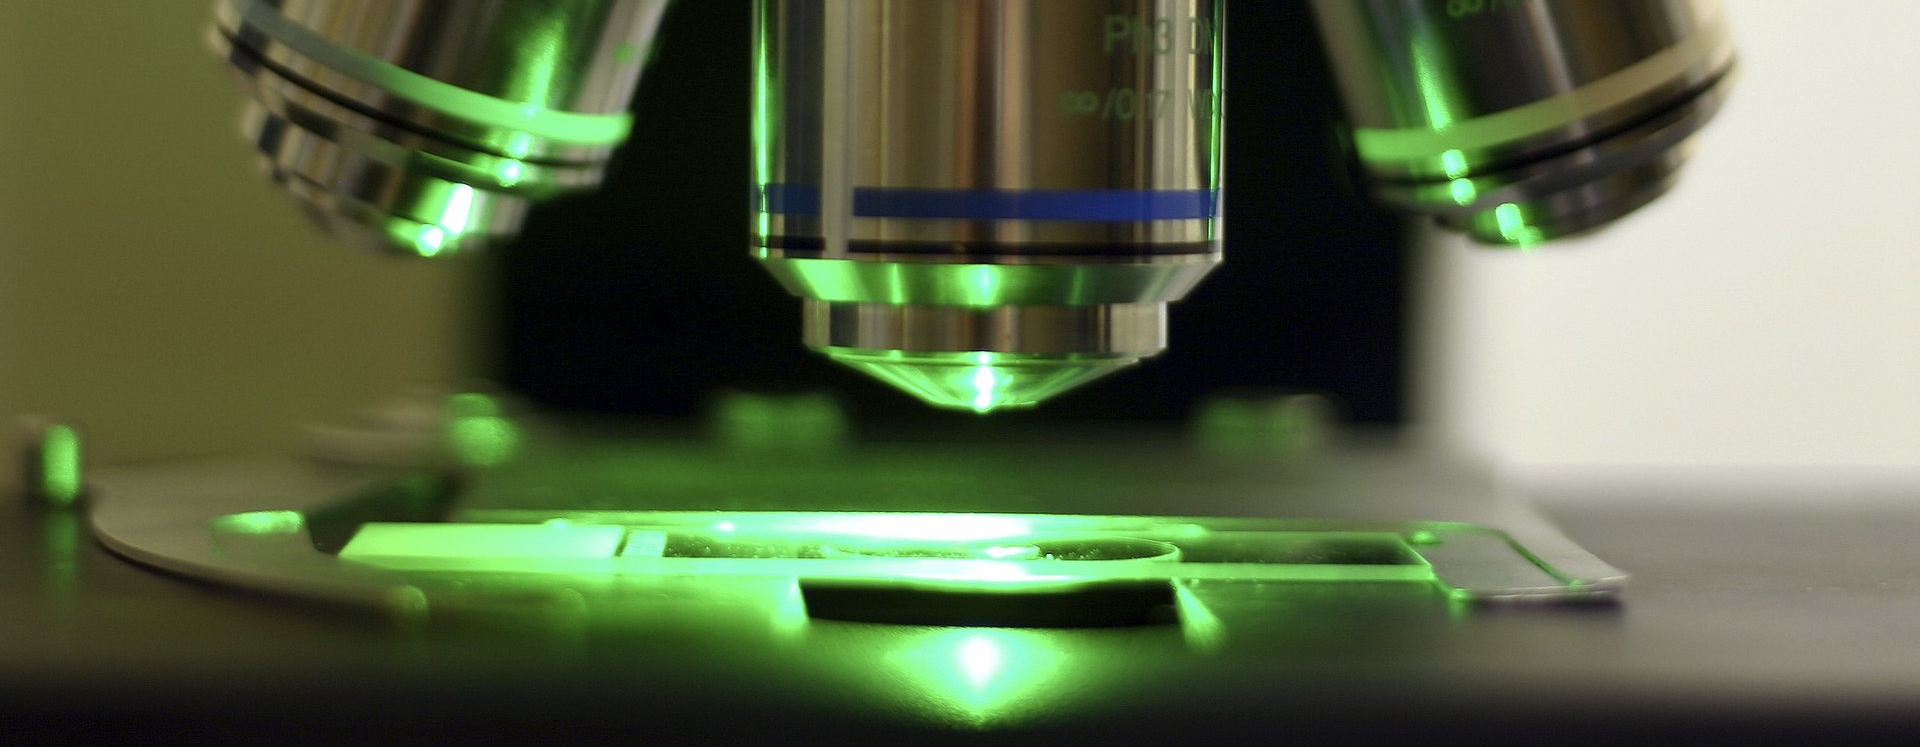 Ti:Sapphire laser application optical tweezers, lithography, spectroscopy